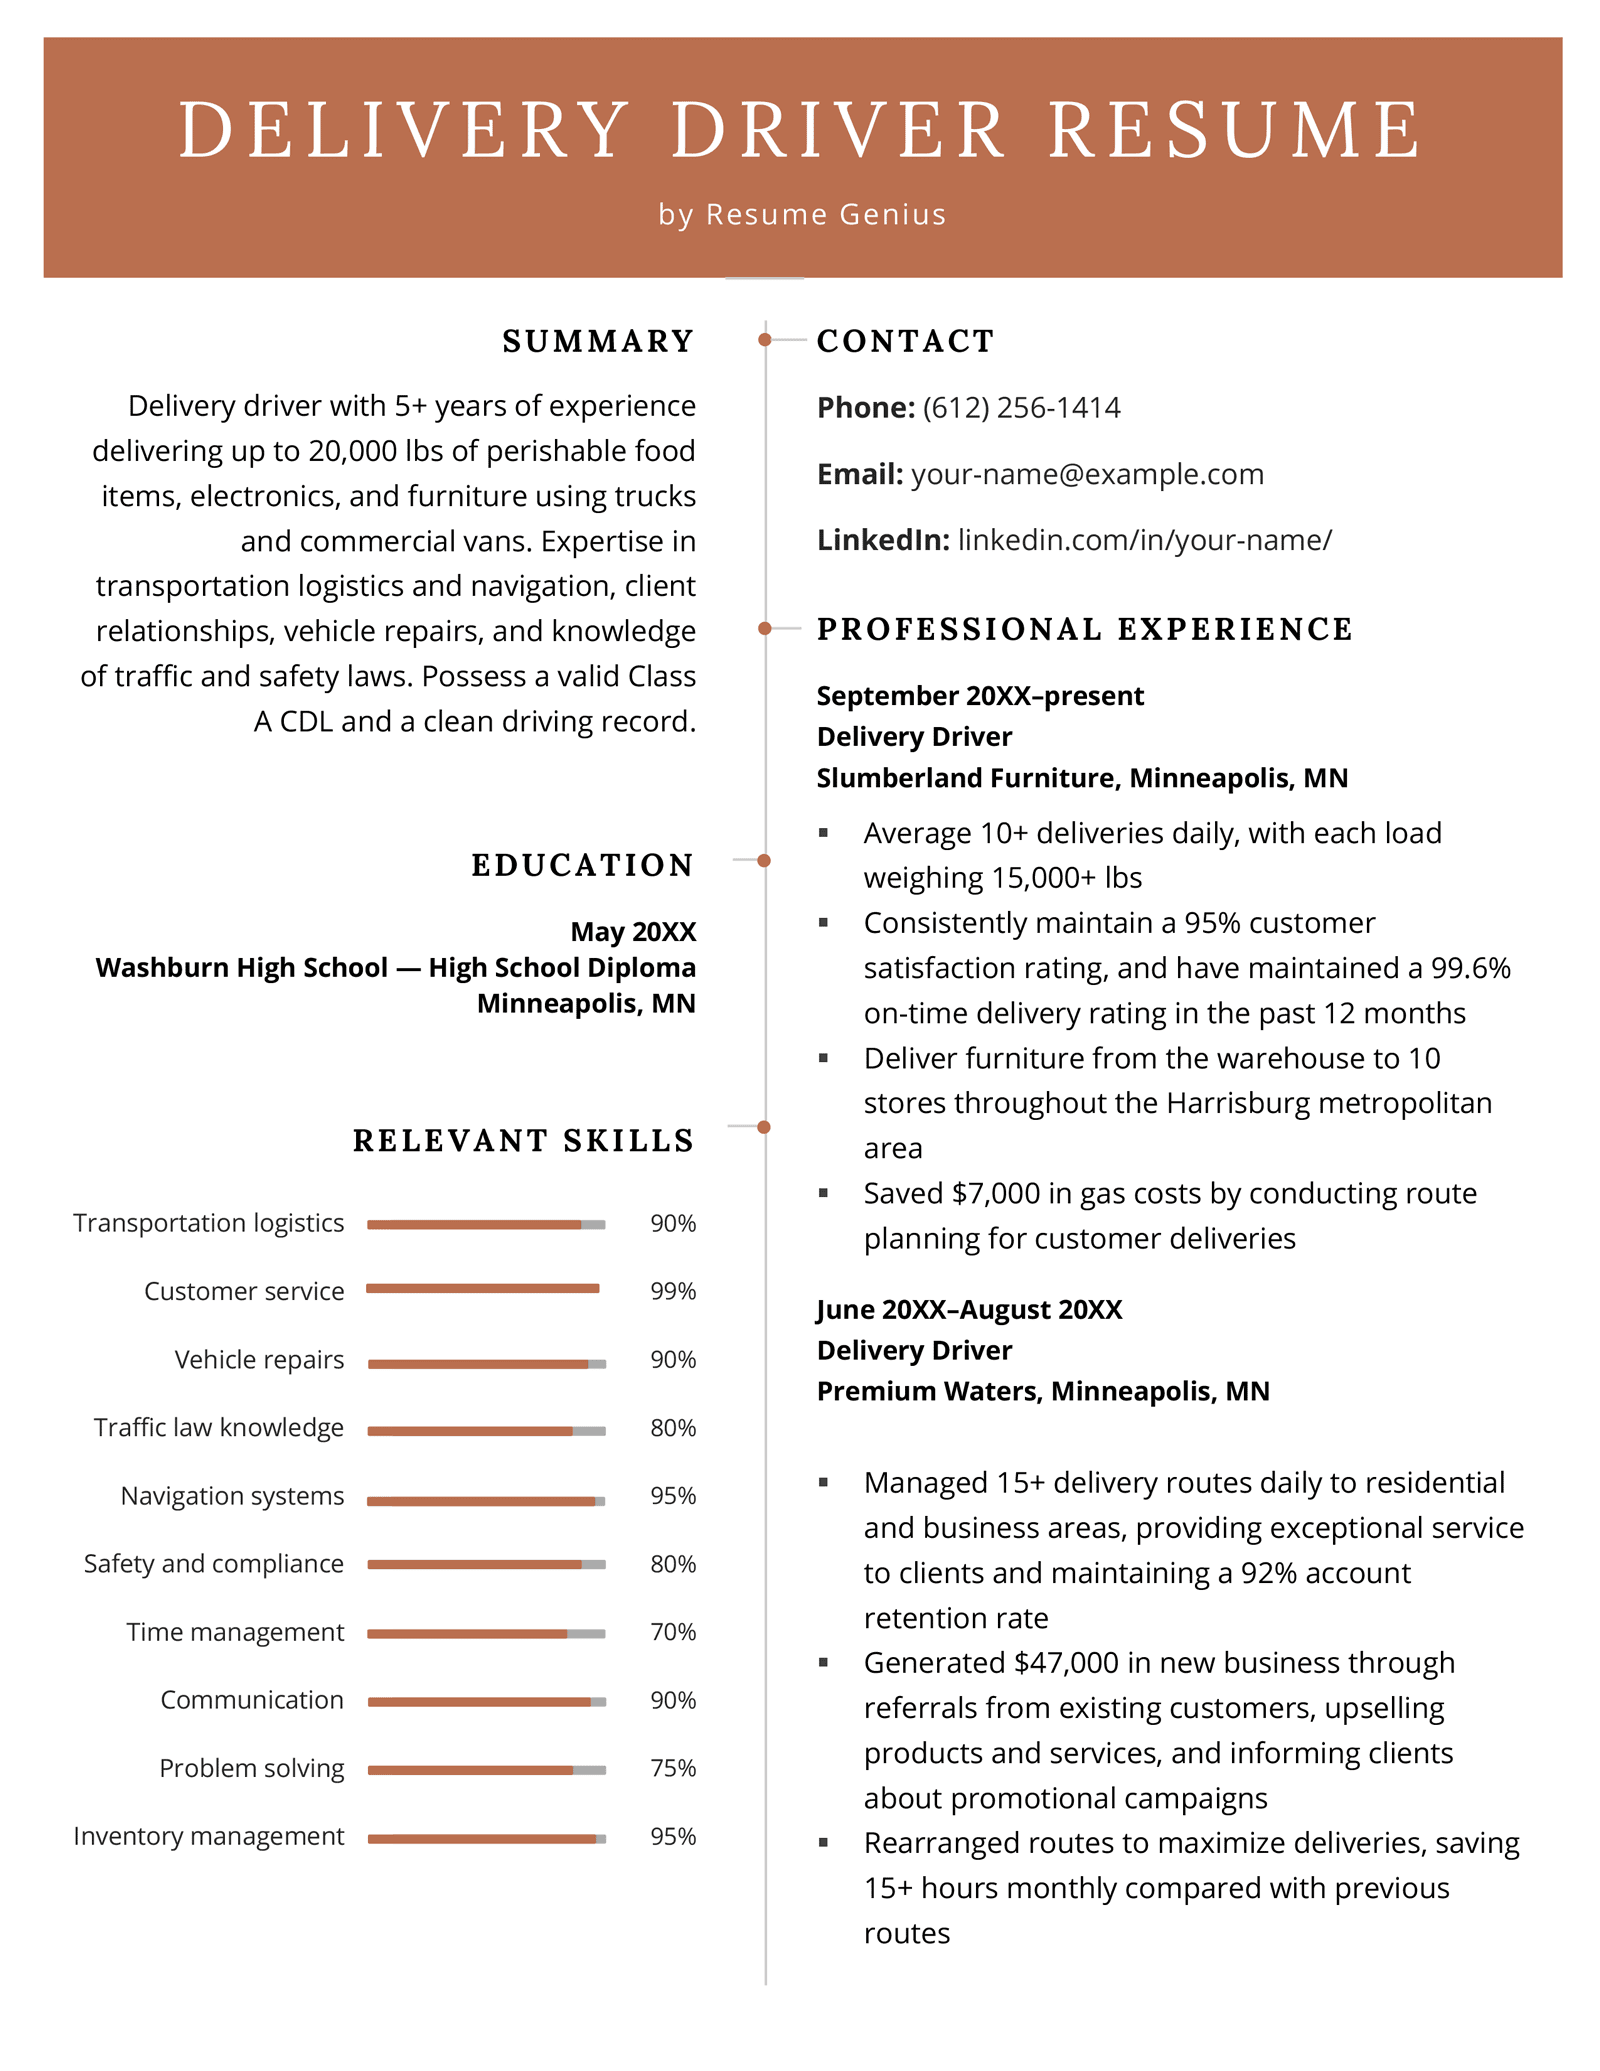 image of a delivery driver resume with a brown header